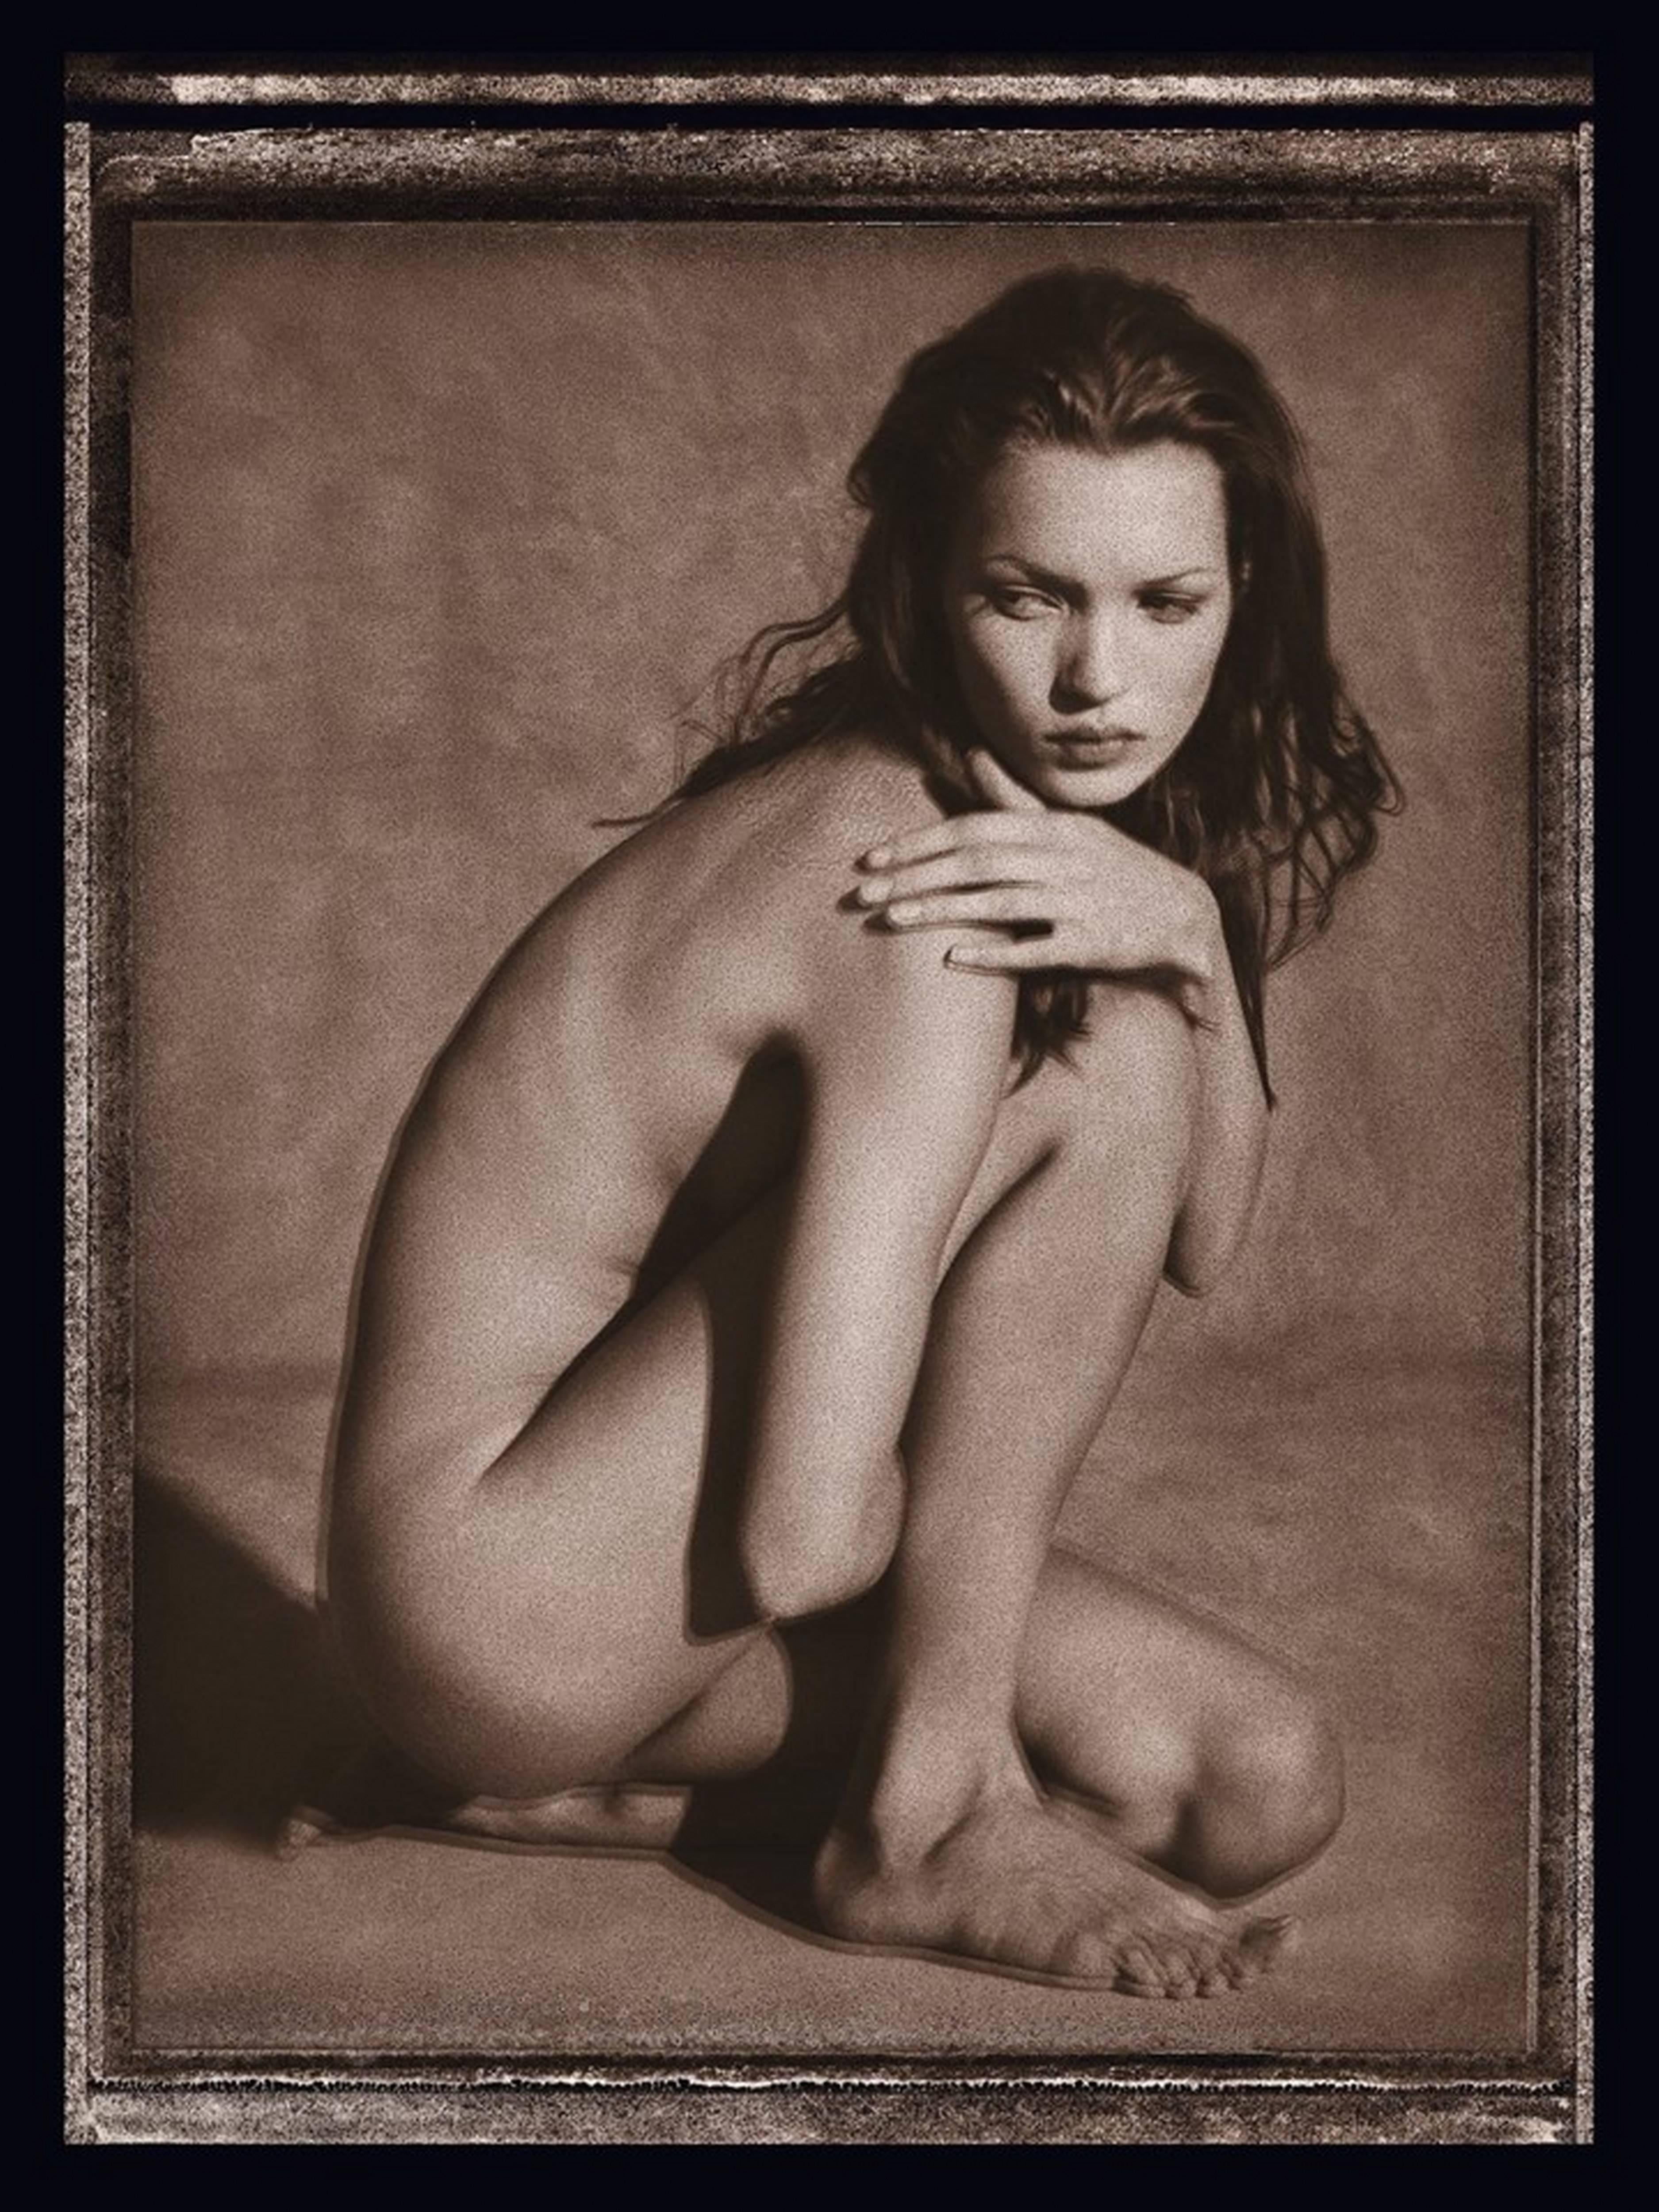 Special Kate Moss print from the ‘ROIDS series - last Artist Print (from the personal archive of the artist) available.

Toned print made from the reverse side of the emulsion from an original Polaroid.

Albert Watson is a veteran of international